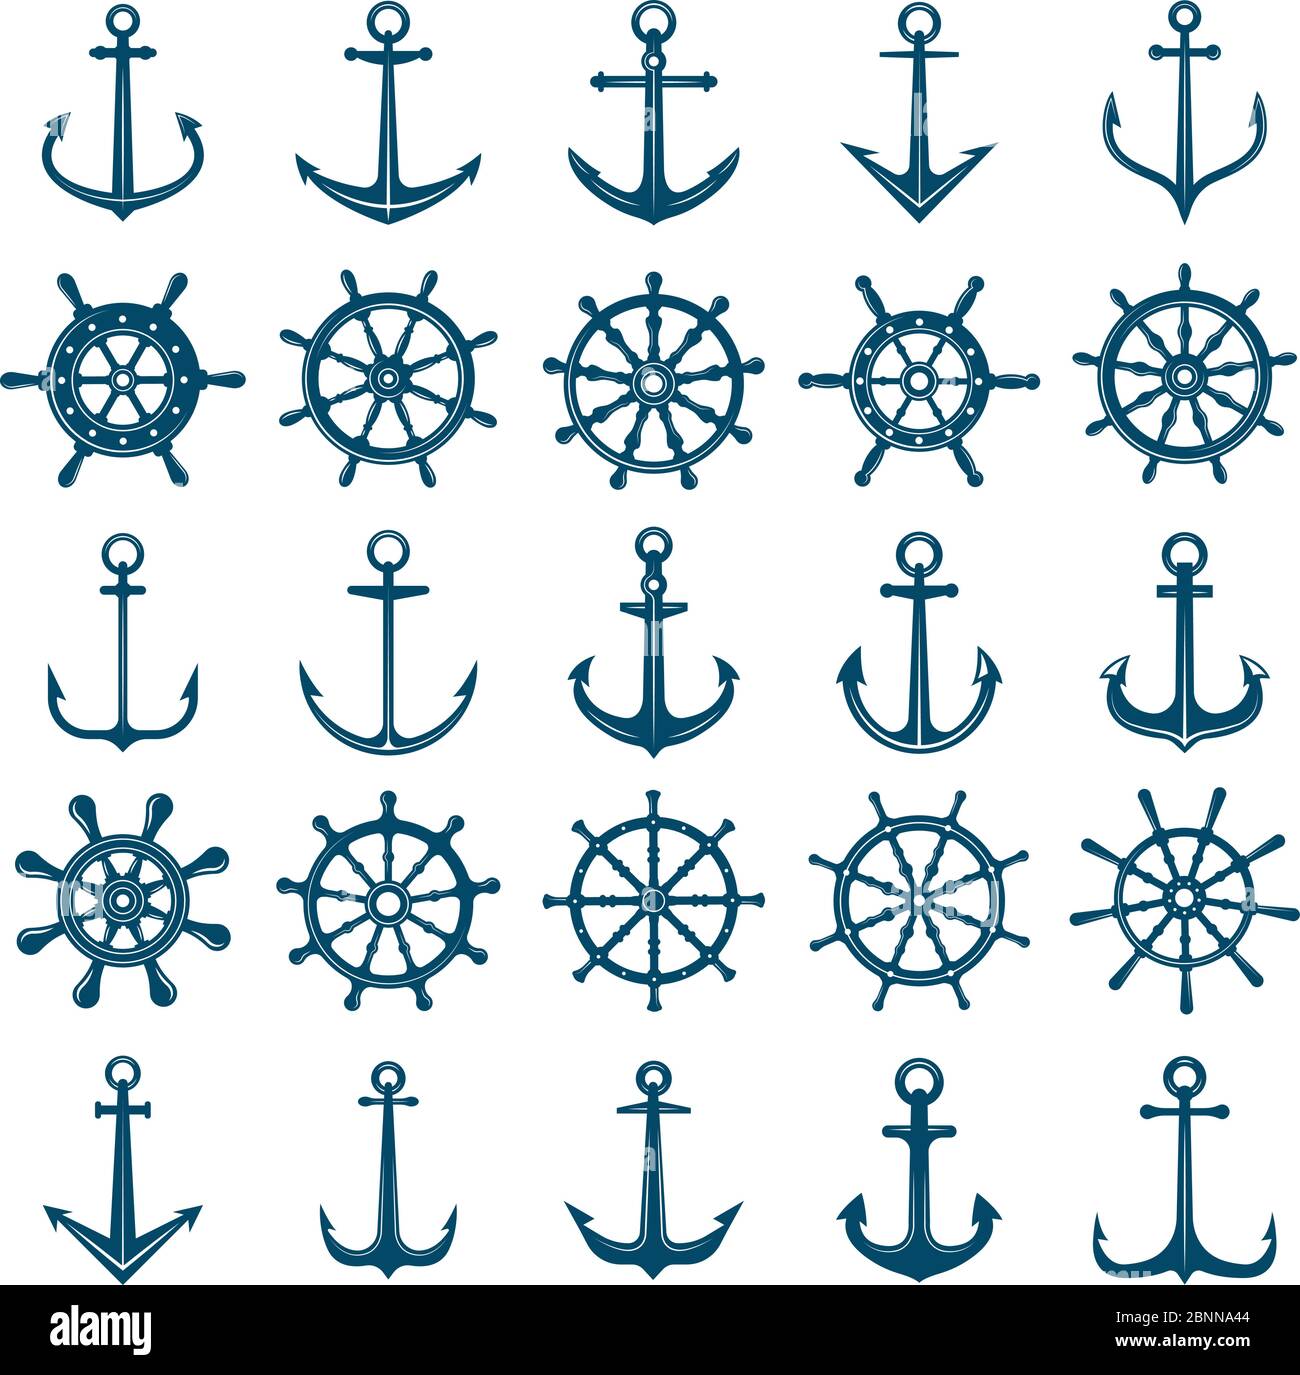 Ship Wheel Tattoo Images Browse 1935 Stock Photos  Vectors Free Download  with Trial  Shutterstock